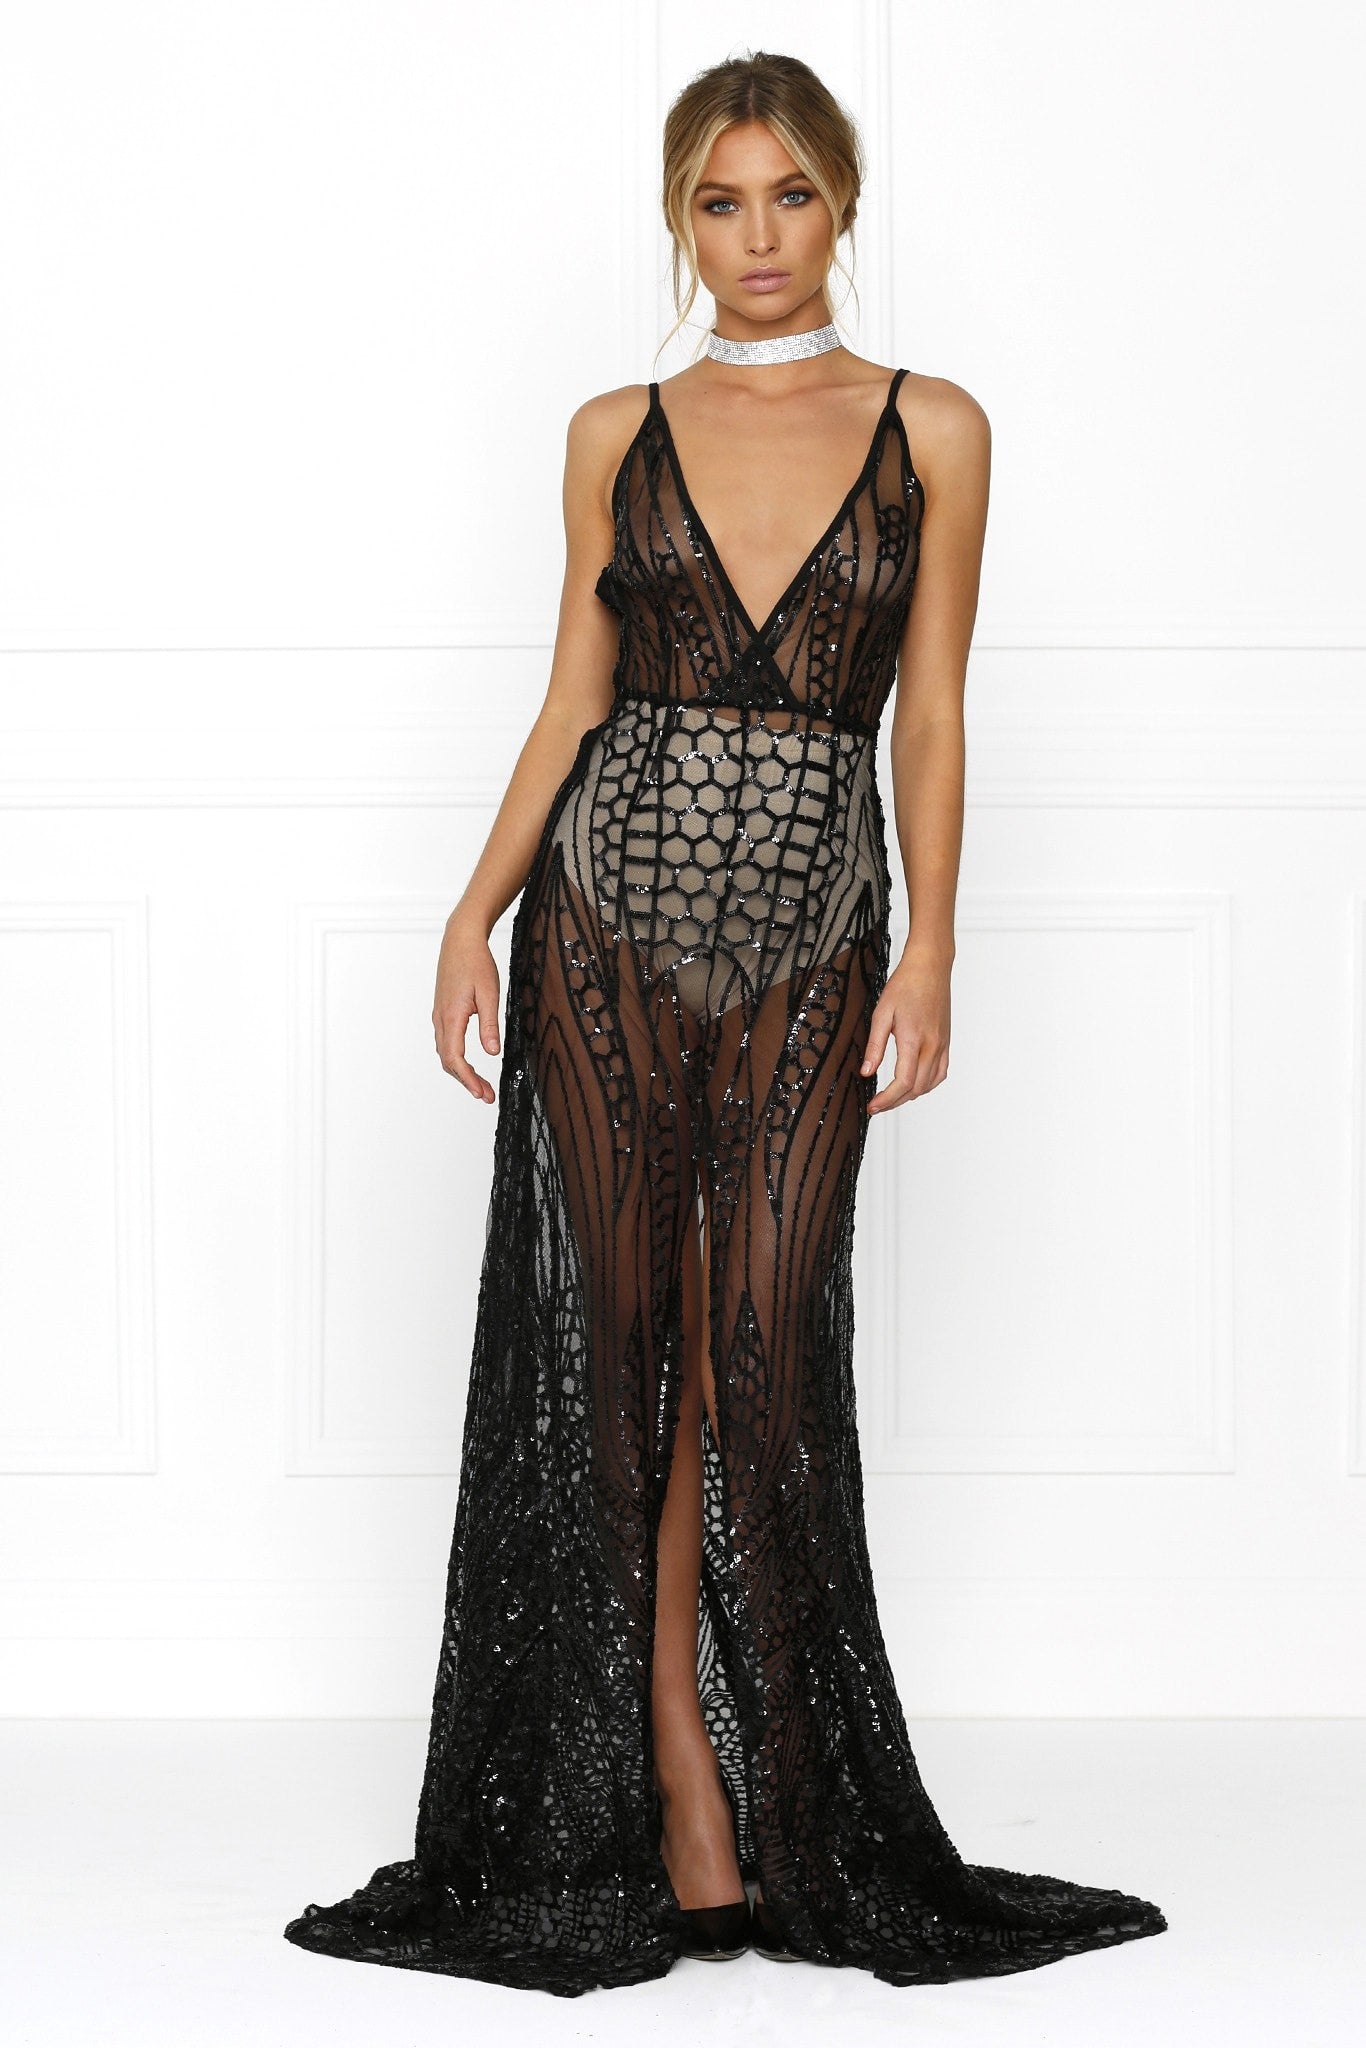 Honey Couture SIENA Black Sheer Sequin w Split Evening Gown Dress Honey Couture$ AfterPay Humm ZipPay LayBuy Sezzle